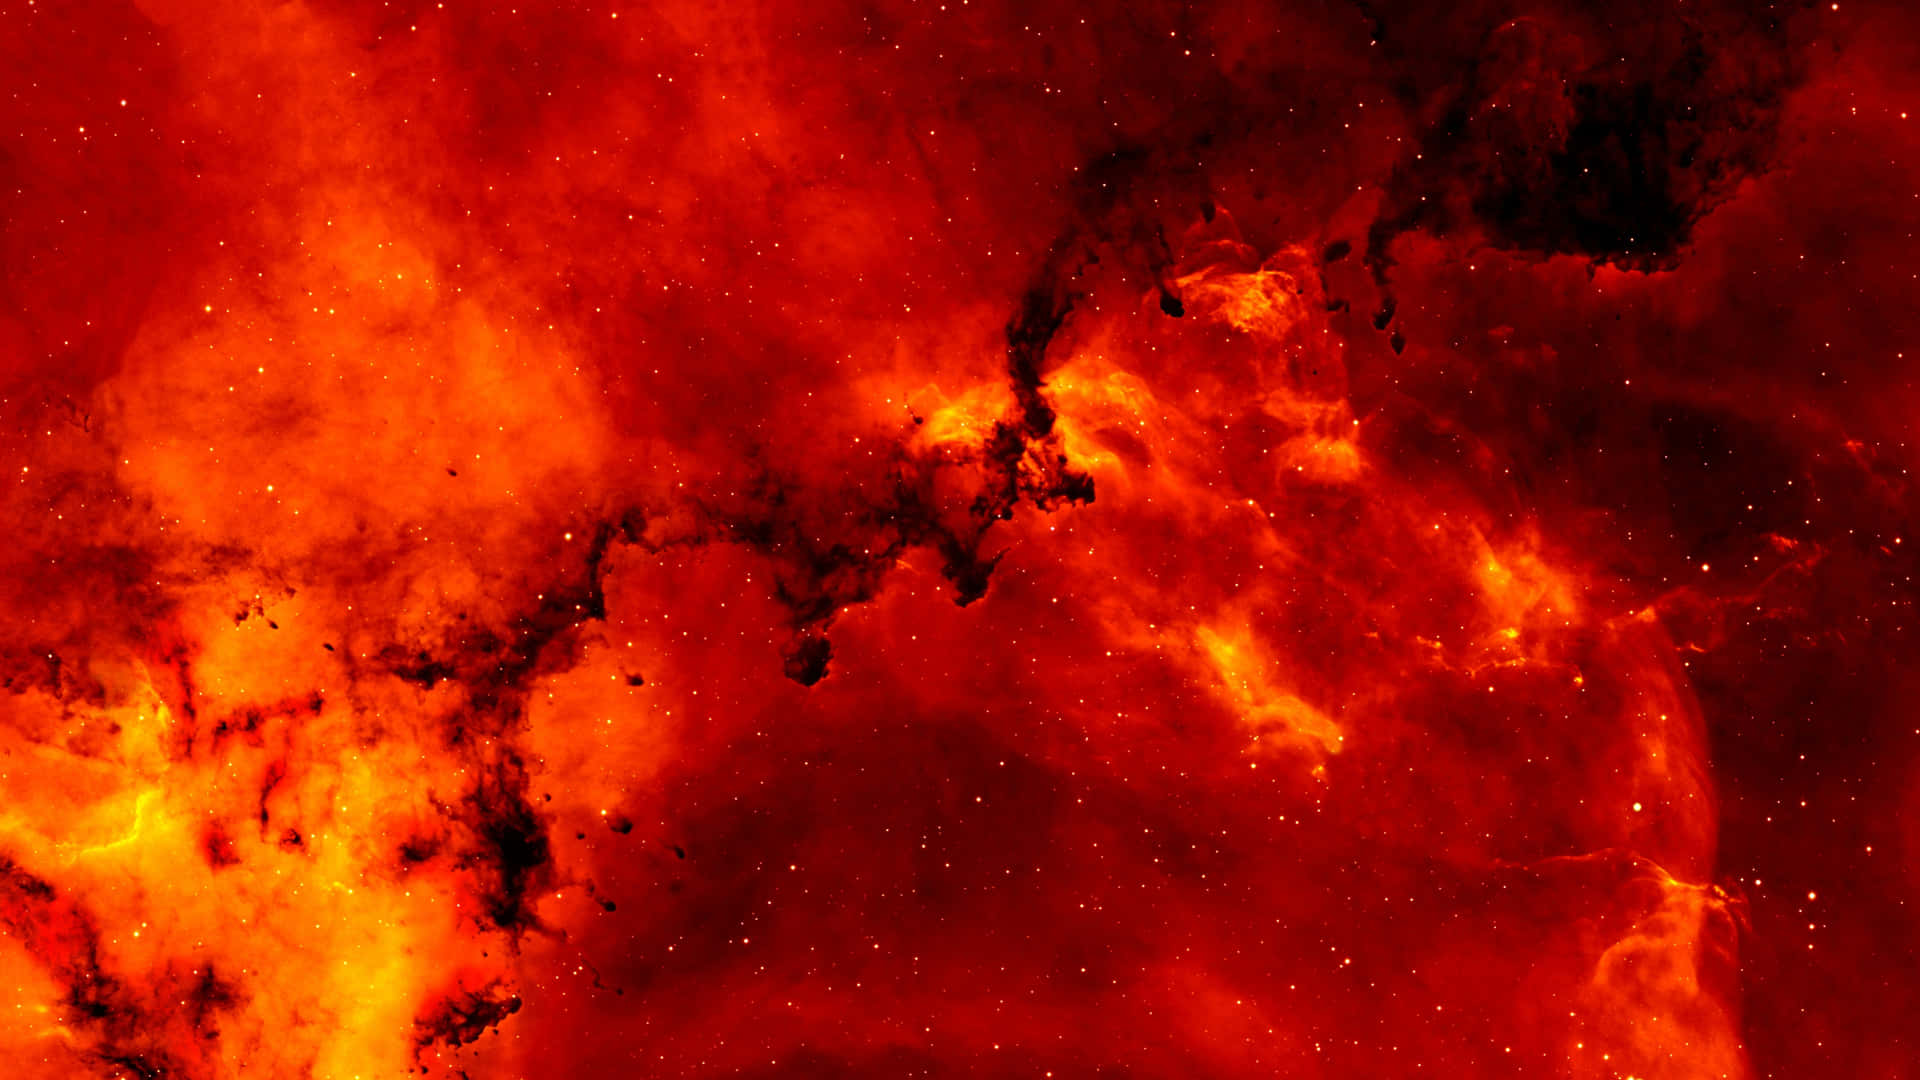 "Discover the Uniqueness of the Outer Space Red 4K" Wallpaper